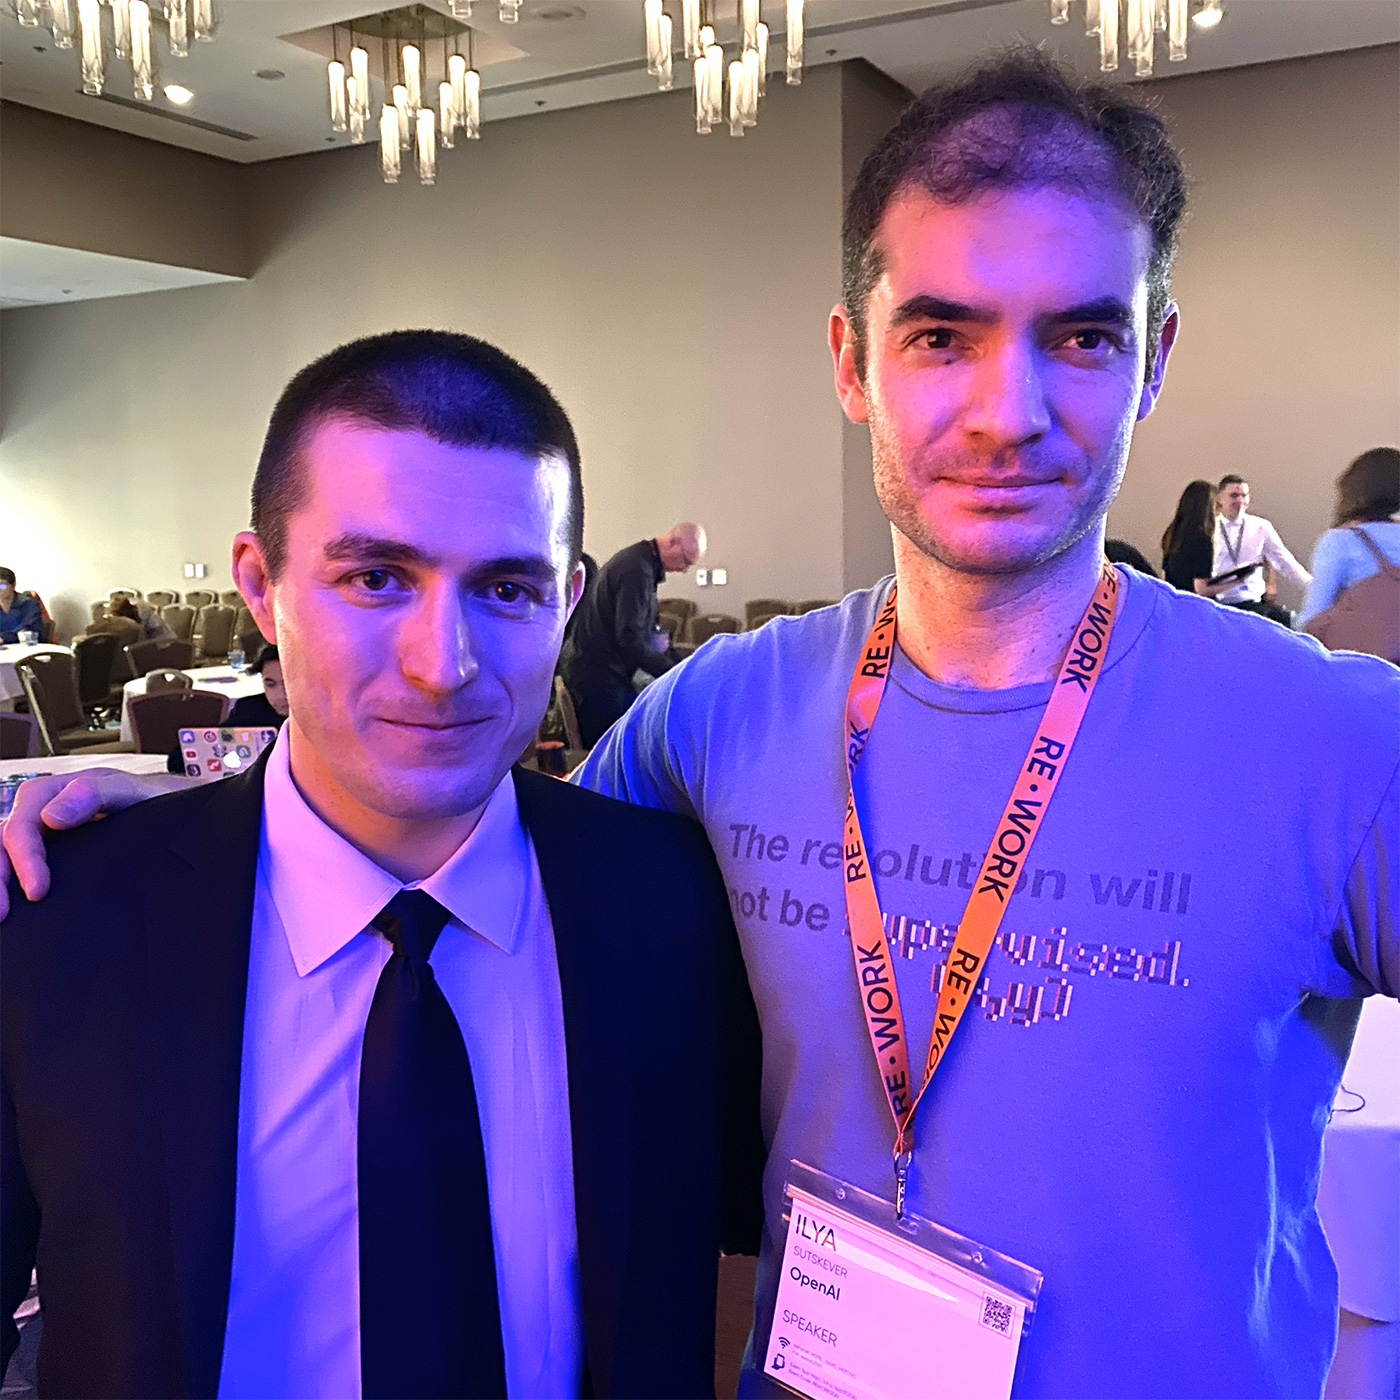 Lex Fridman on X: I had a great time chatting with Ilya Sutskever  (@ilyasut) on stage at ReWork (@reworkdl) today after giving a talk there.  We also recorded a podcast. Ilya is